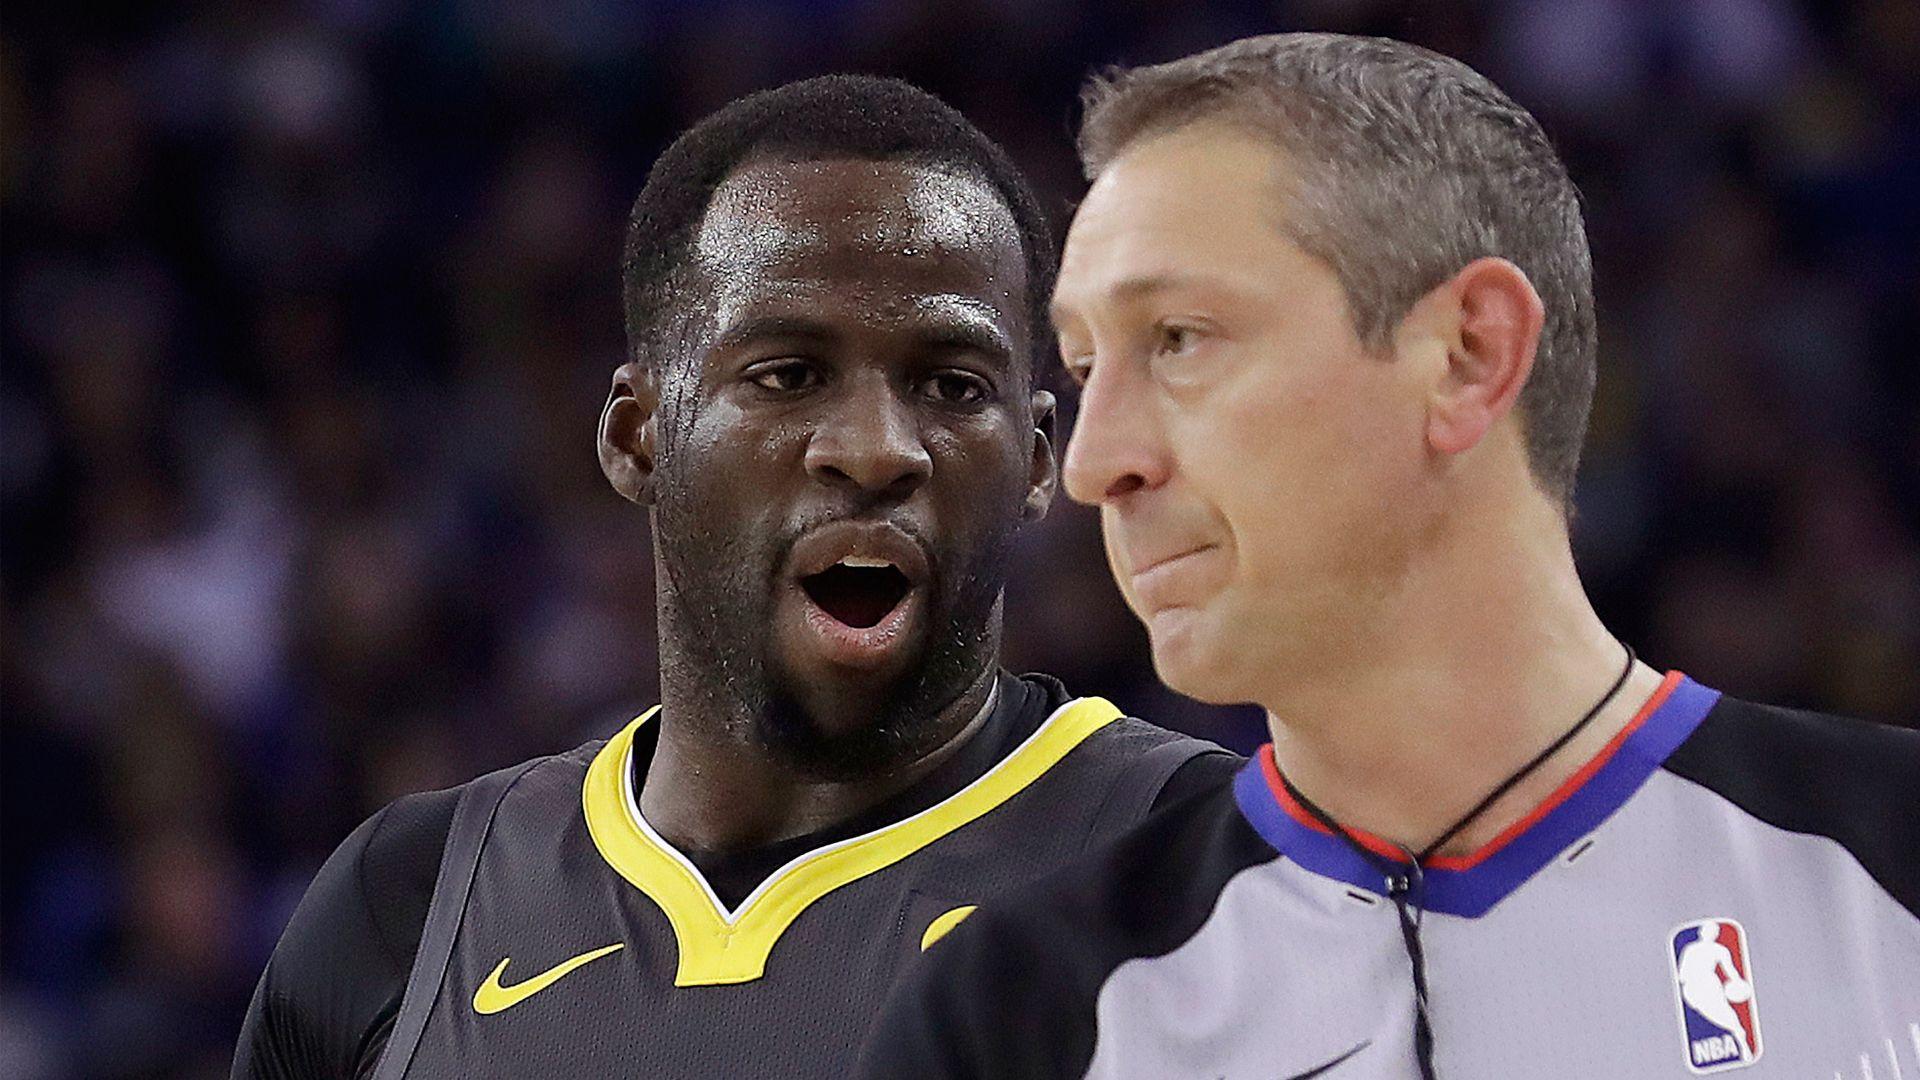 The flaw in Draymond Green's referee suggestion is obvious. NBCS